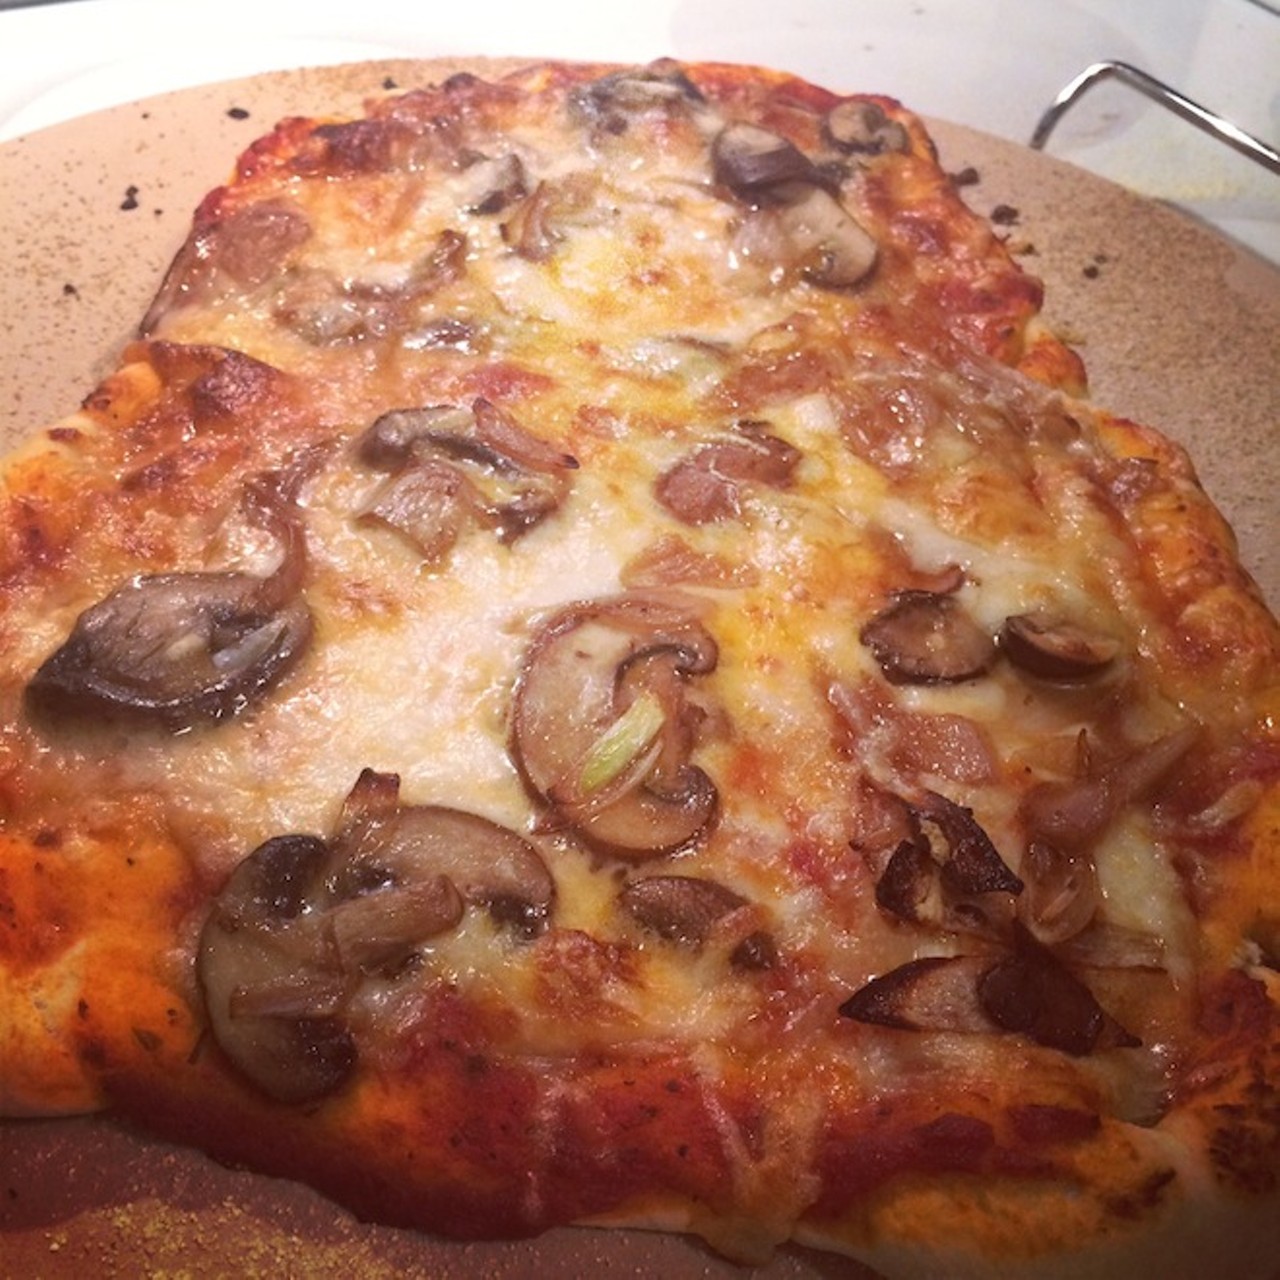 Homemade pizza with mushrooms and carmelized shallots